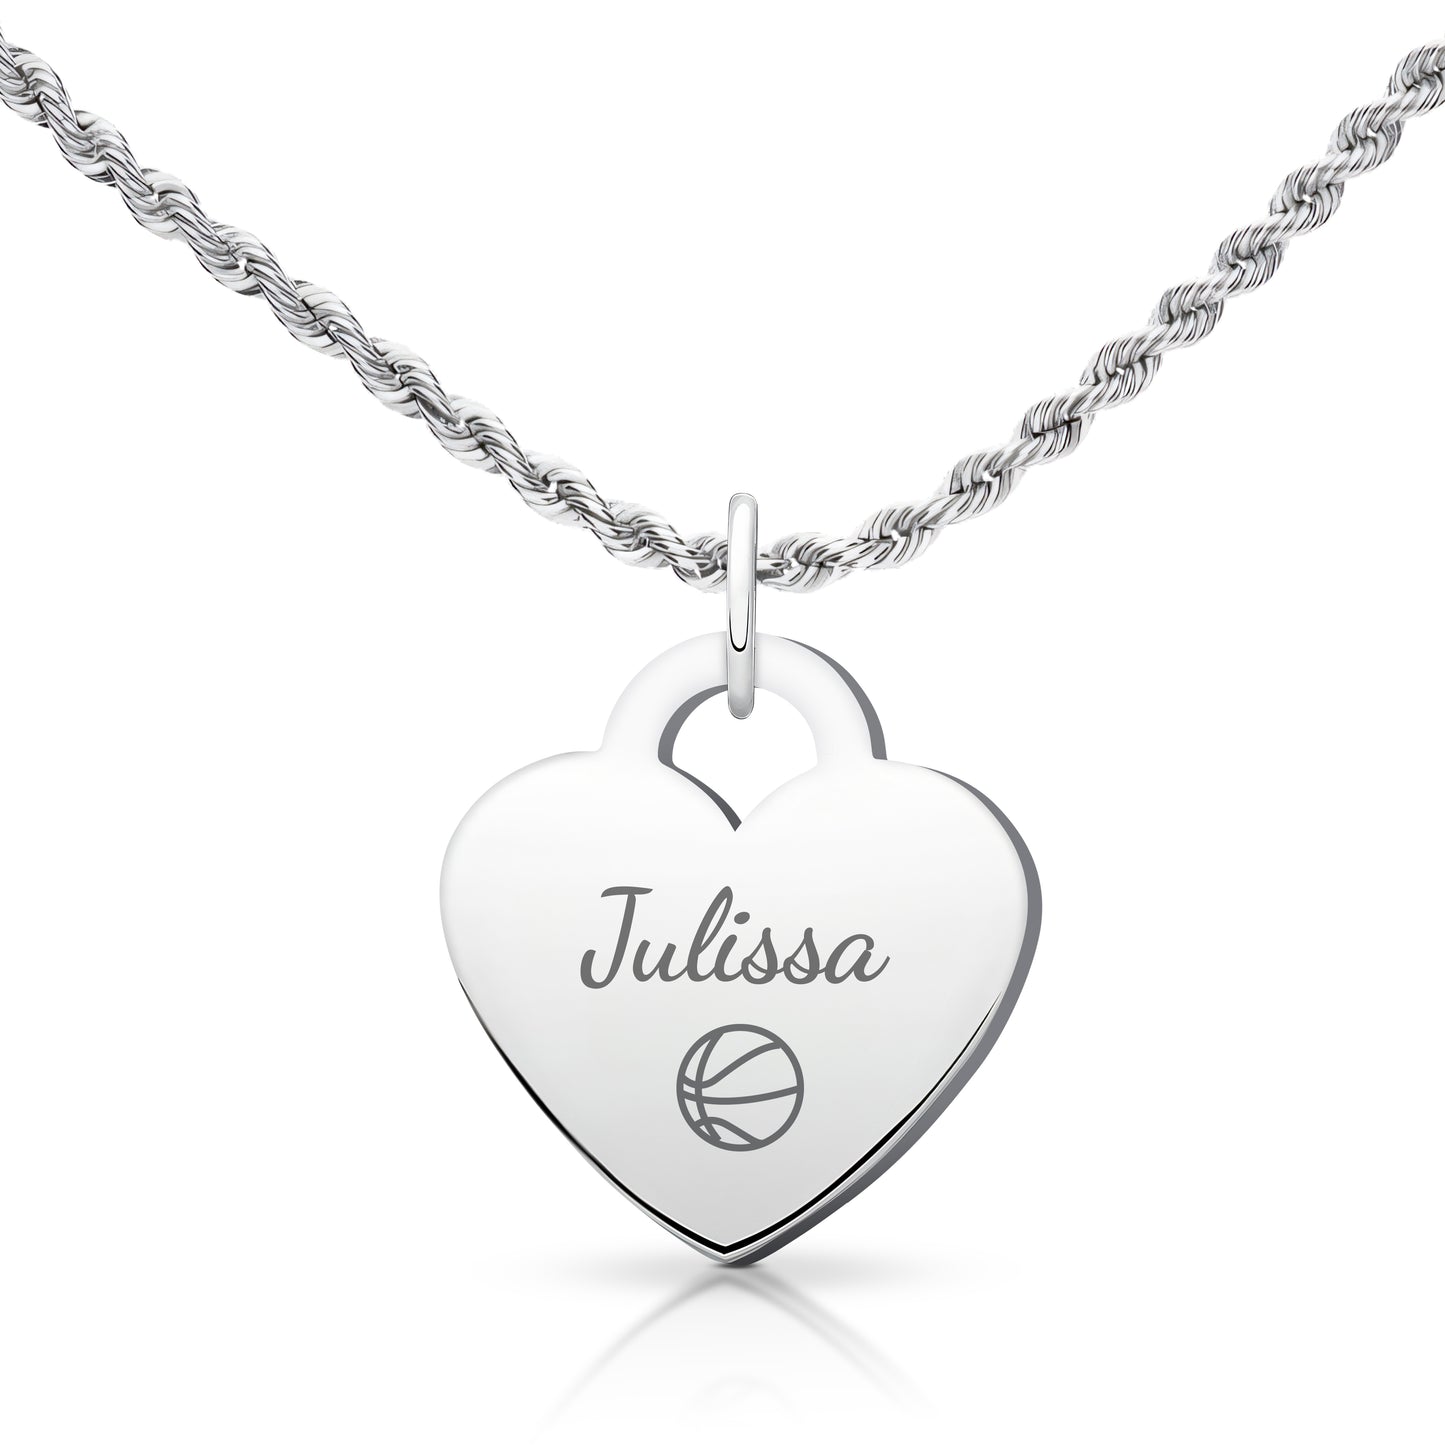 Basketball - Personalized Silver Rope Heart Shaped Basketball Necklace